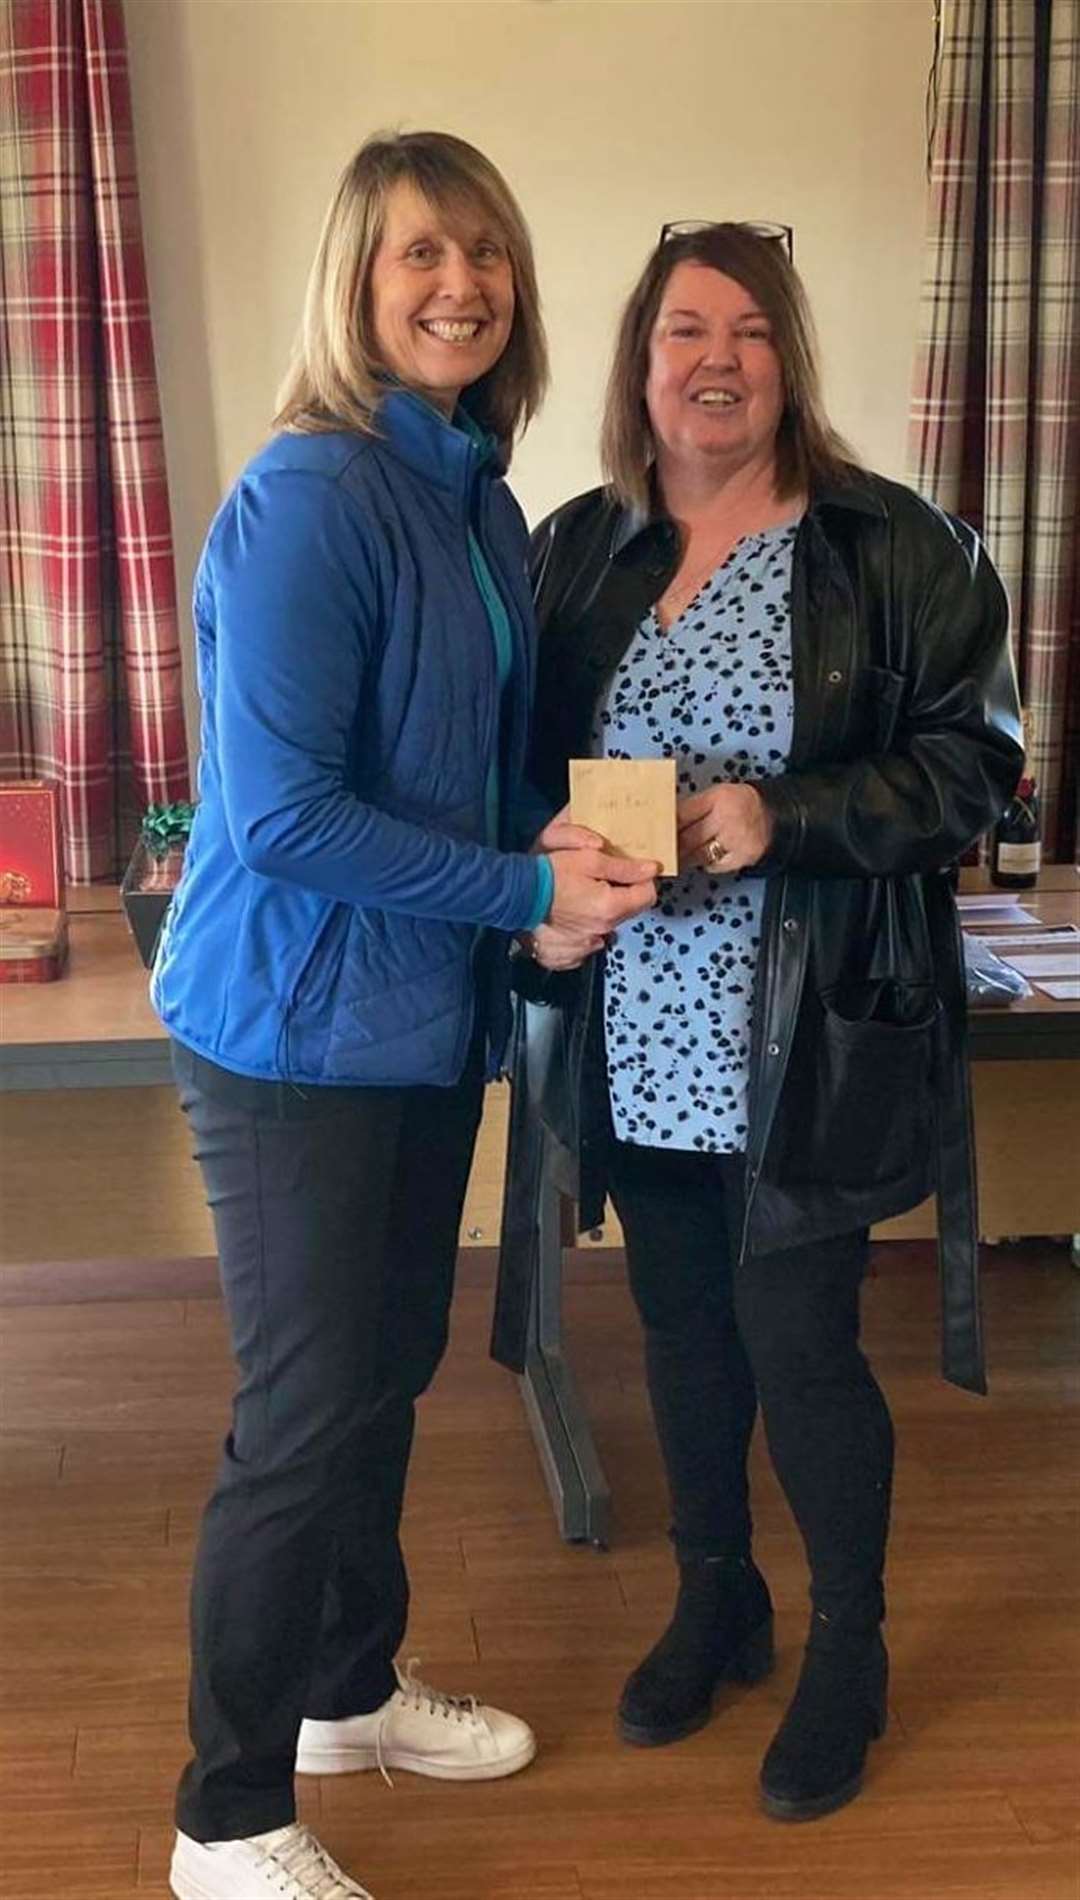 Pam Bain receiving her runner-up prize from Maryjane.